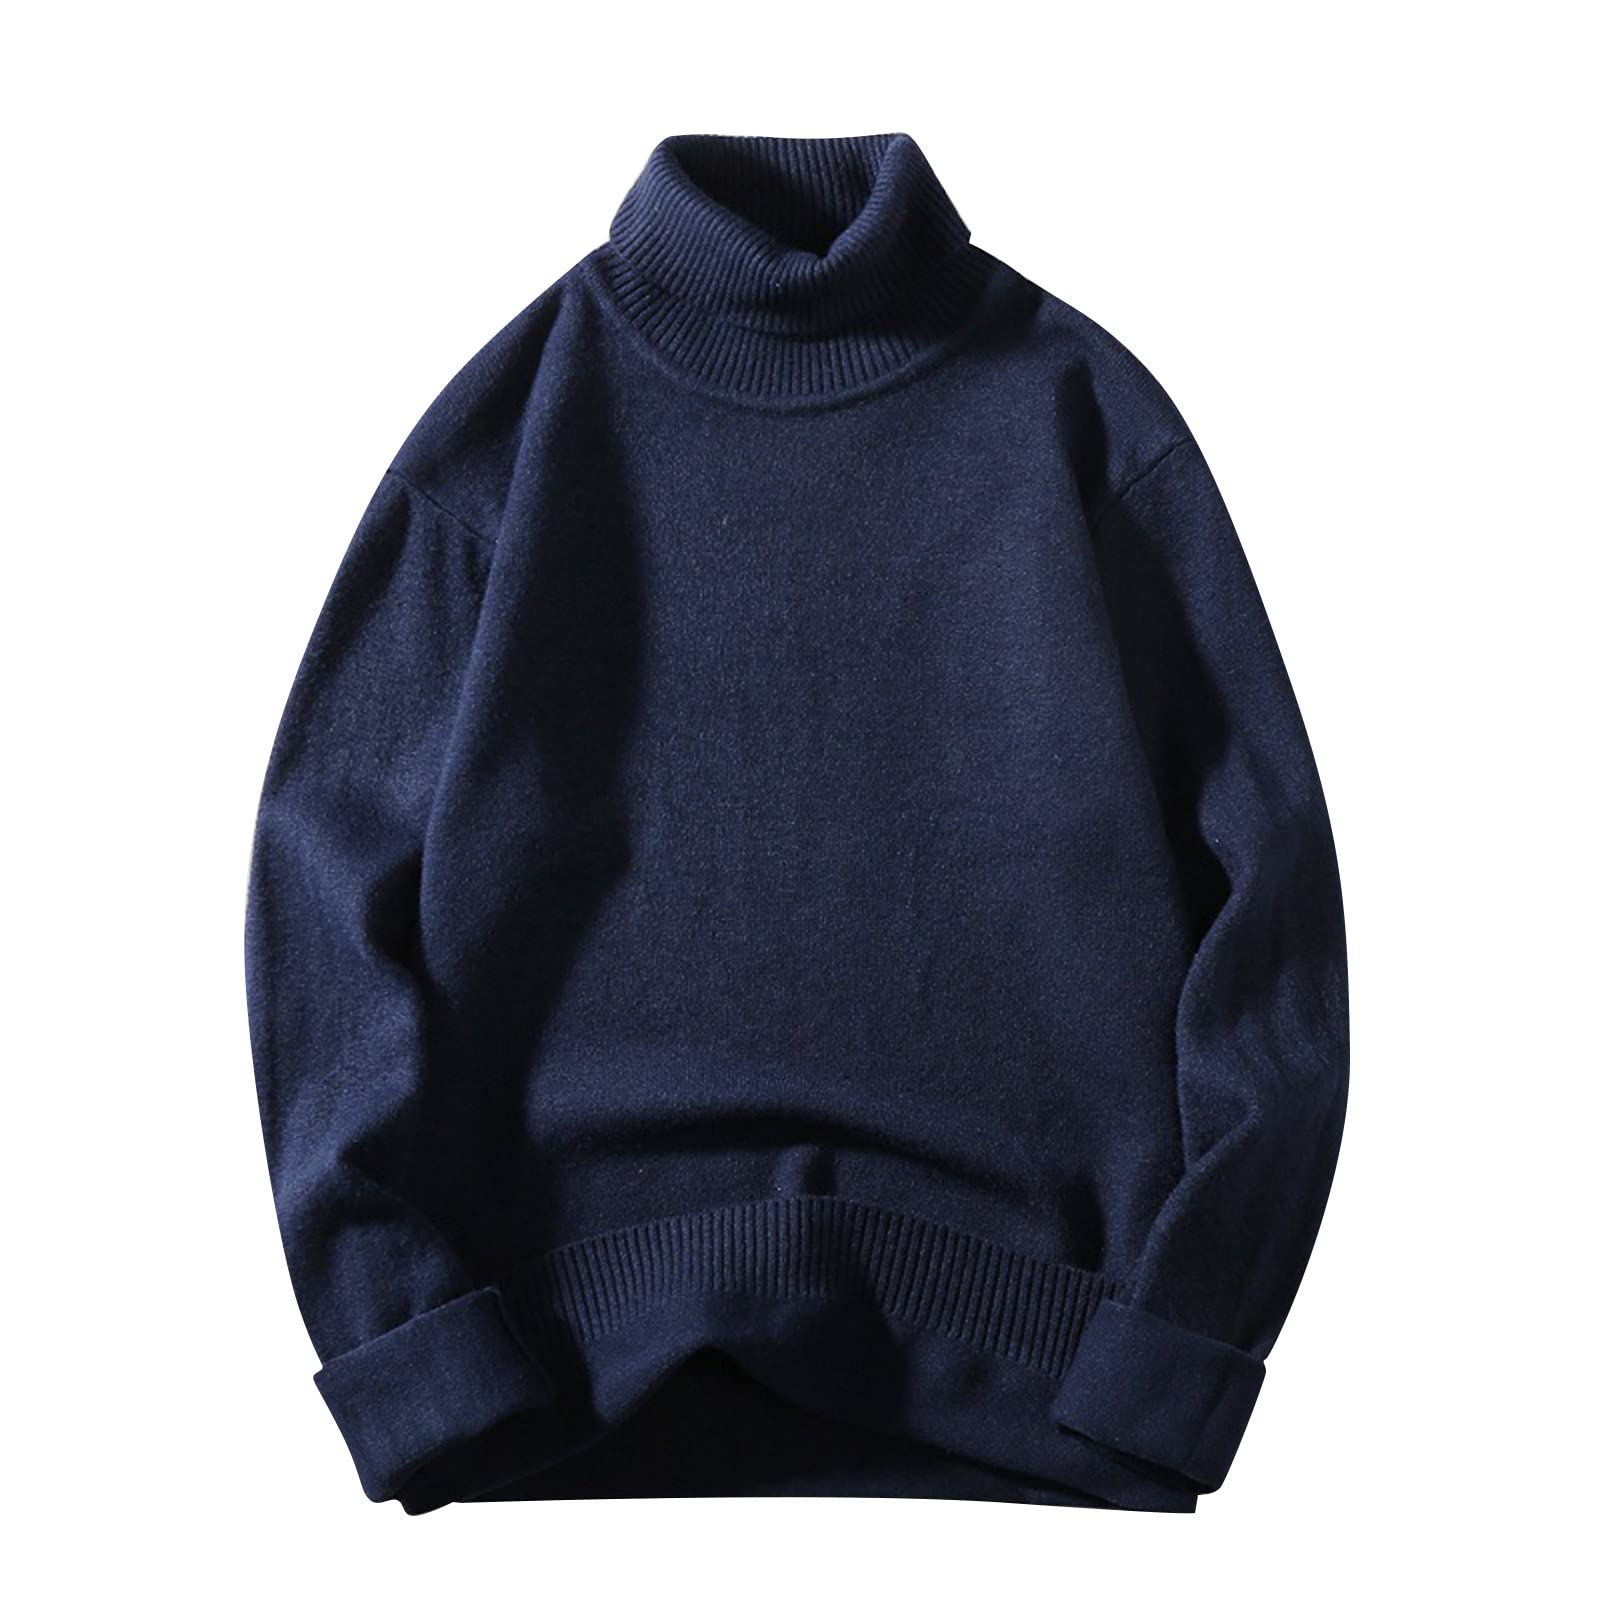 XIAXOGOOL Men Sweaters Fashion,Mens Turtleneck Sweater Pullover Casual Loose Fit Winter Long Sleeve Cable Knit Sweaters